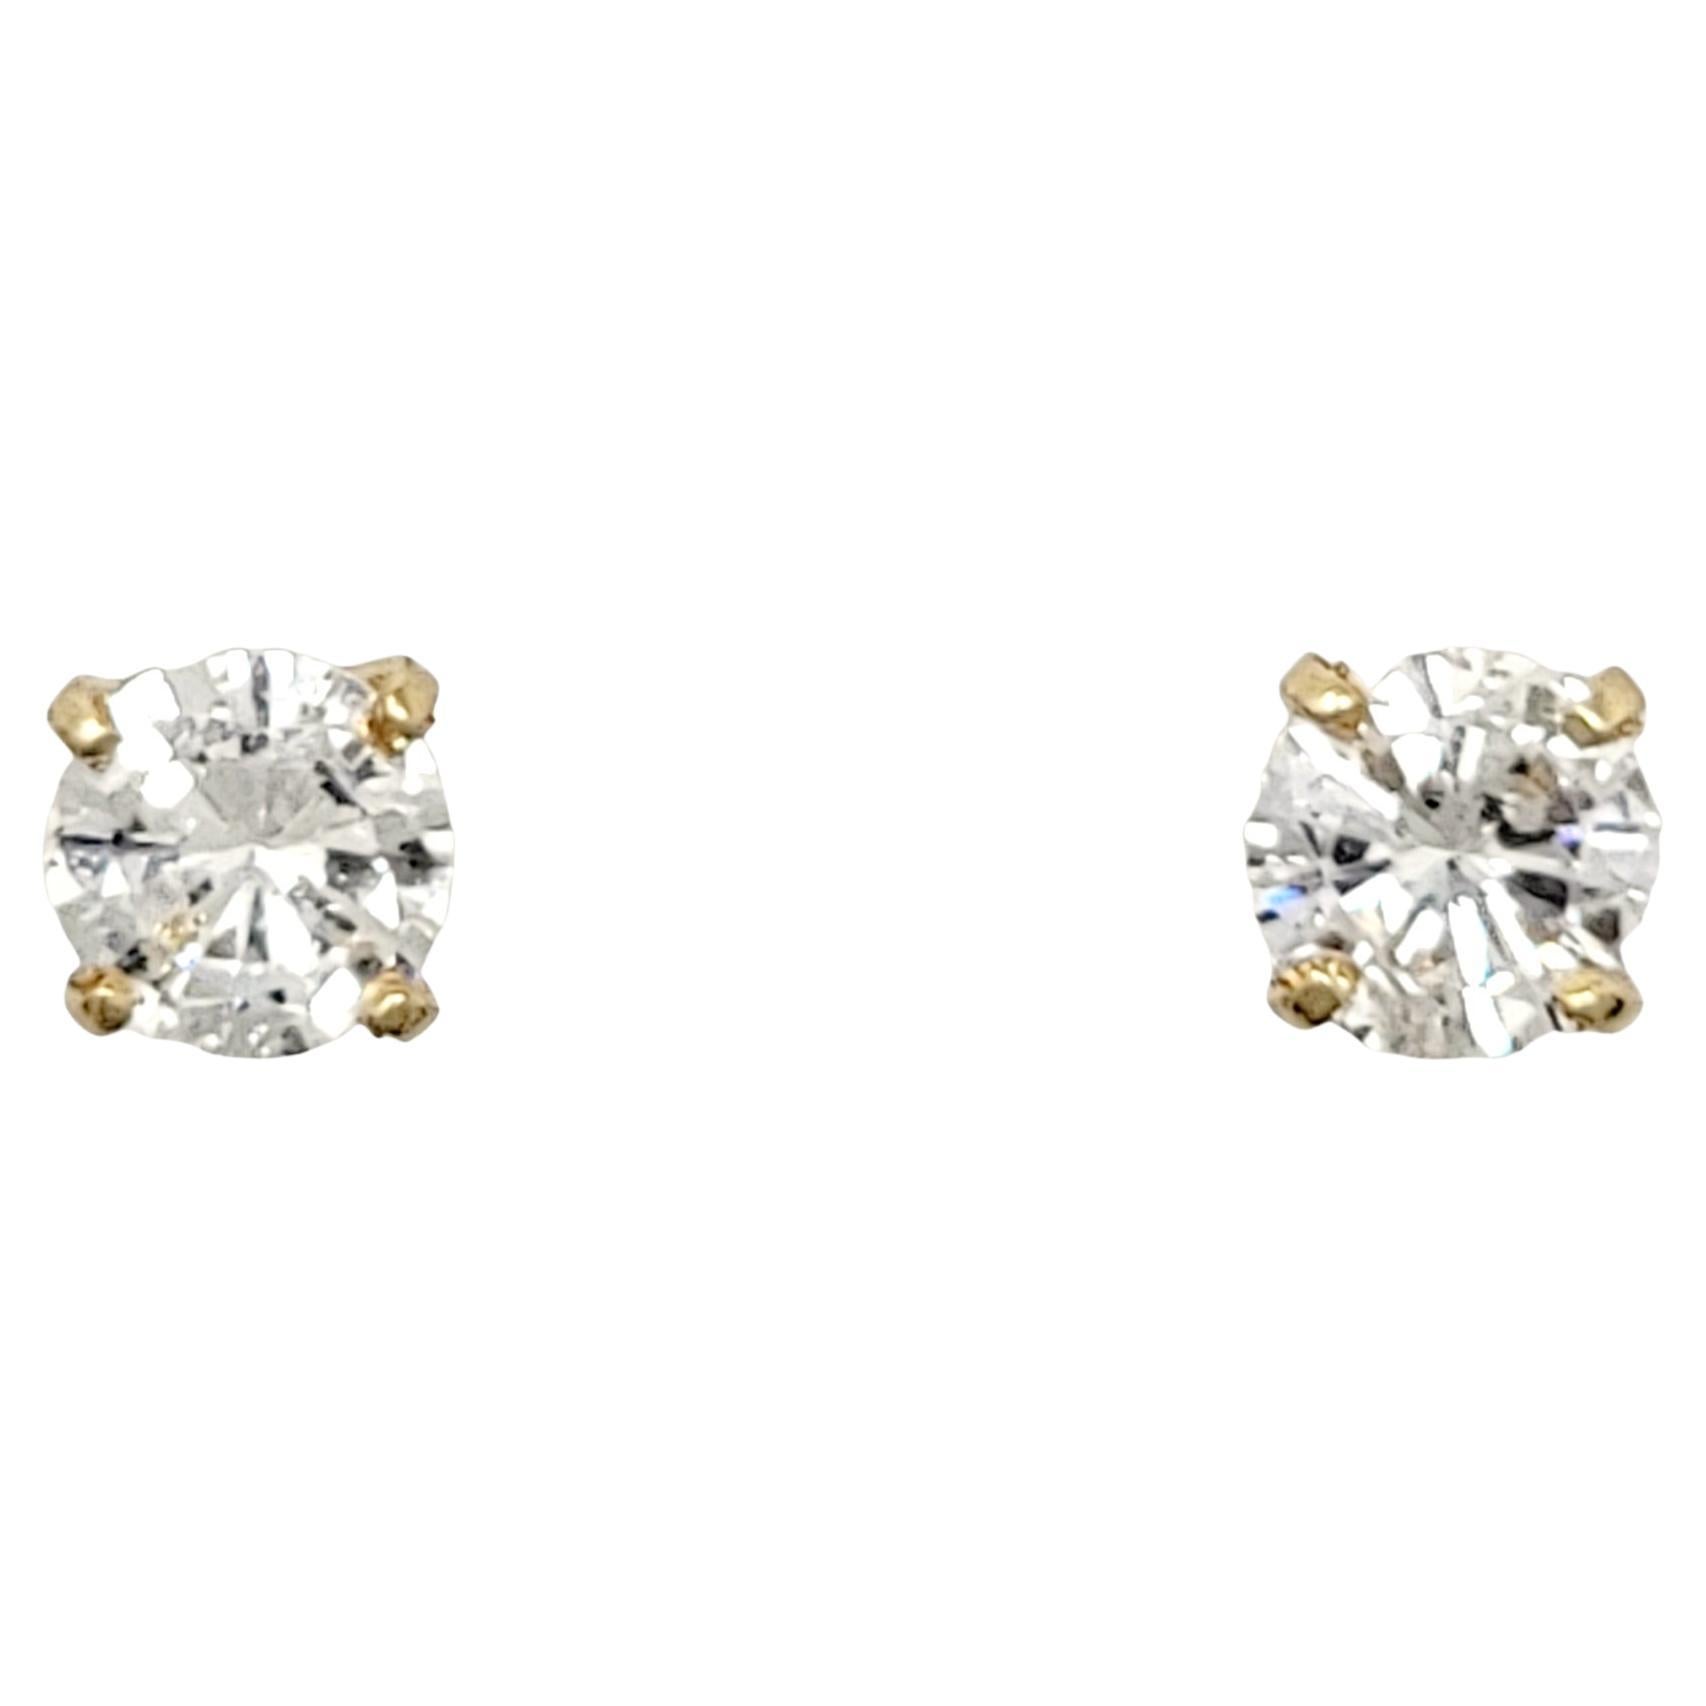 Contemporary 1.10 Carat Total Round Brilliant Solitaire Diamond Stud Earrings in Yellow Gold